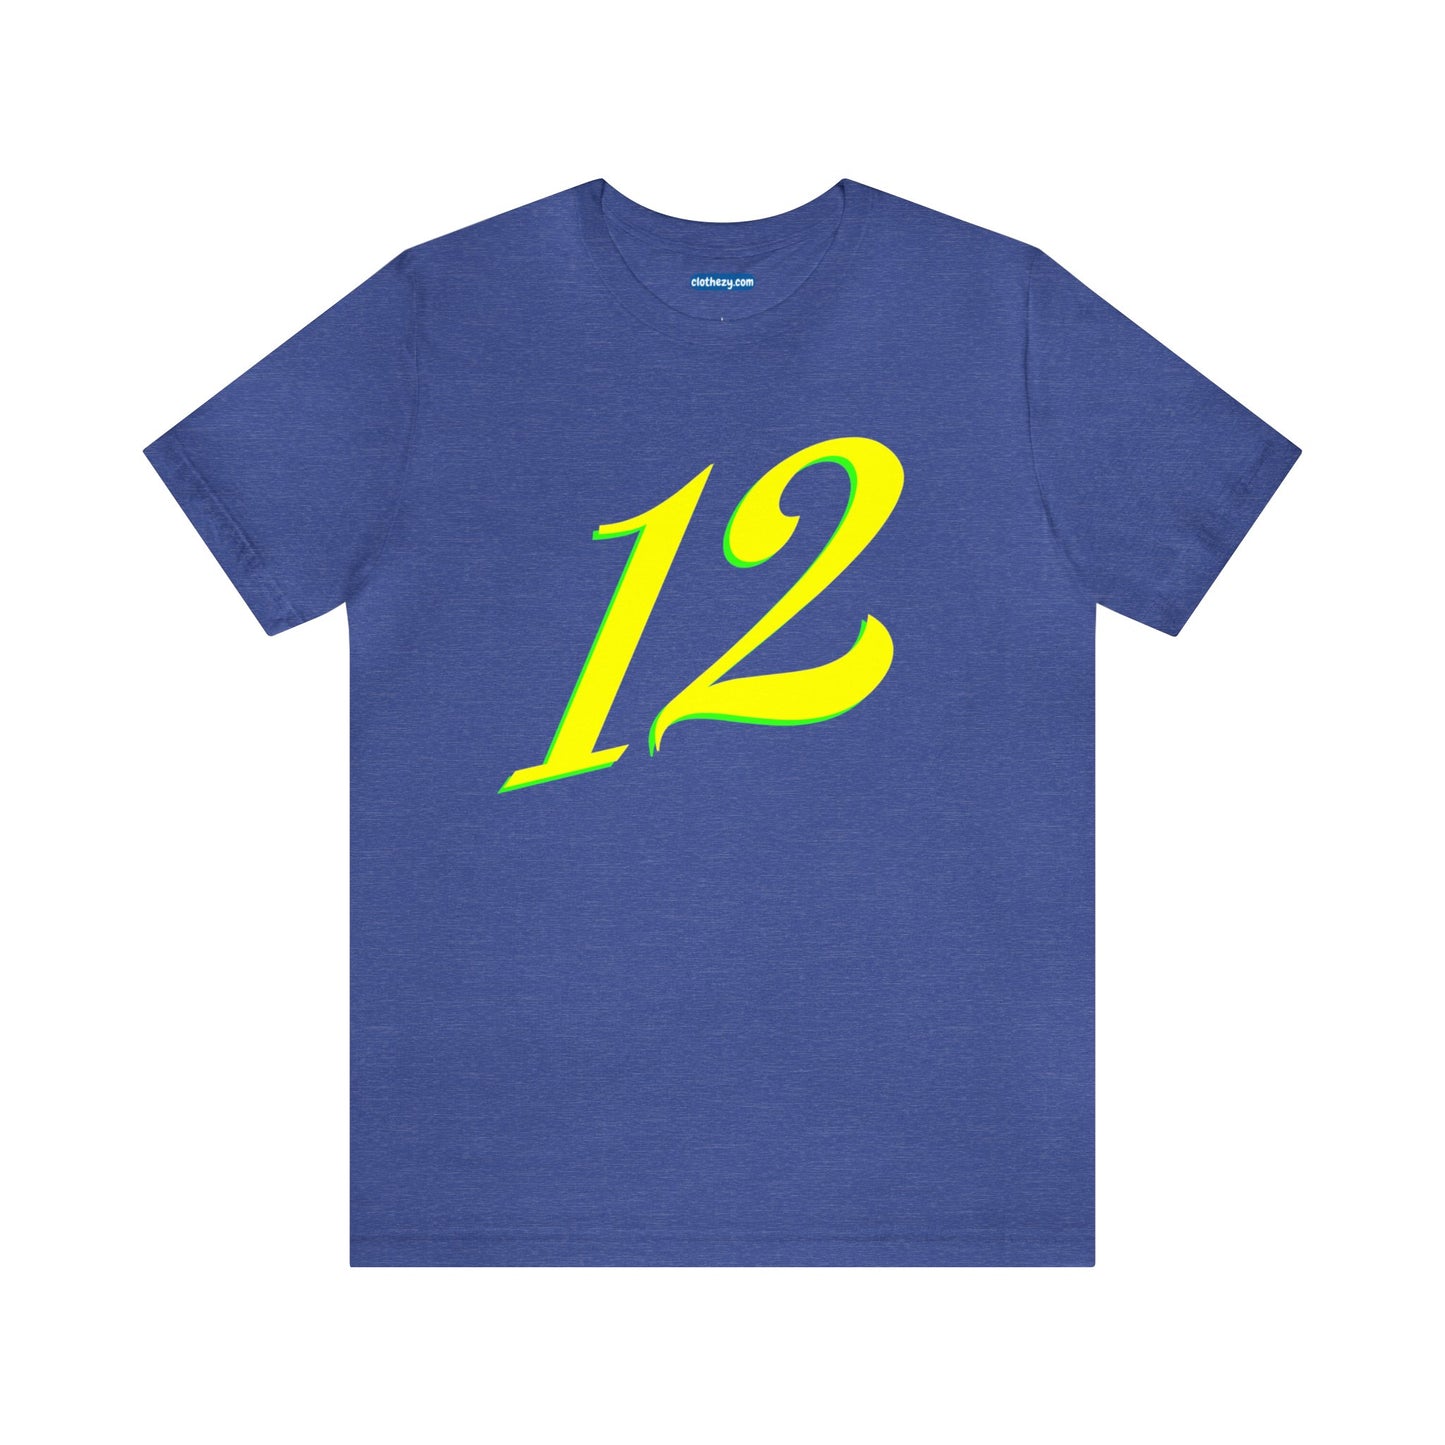 Number 12 Design - Soft Cotton Tee for birthdays and celebrations, Gift for friends and family, Multiple Options by clothezy.com in Navy Size Small - Buy Now